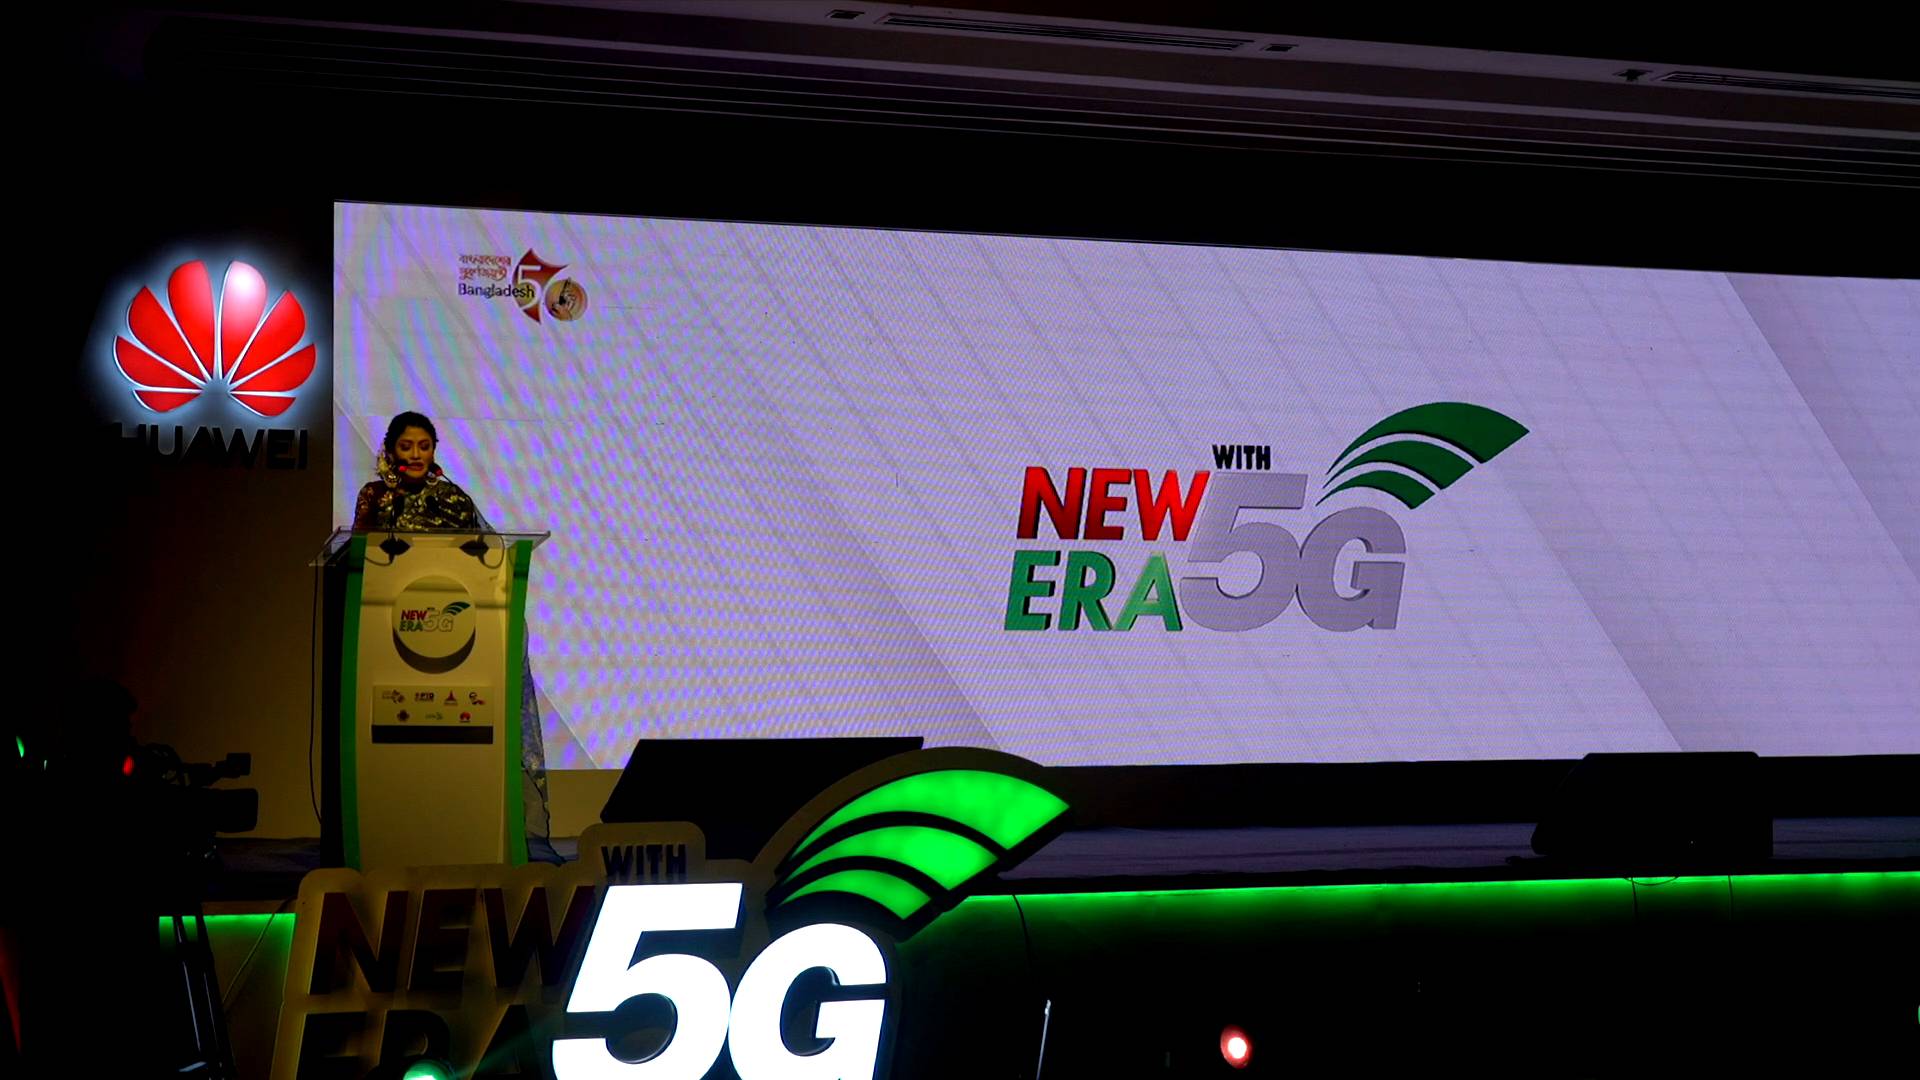 GLOBALink | Bangladesh inaugurates 5G mobile services in association with Chinese telecom giant Huawei